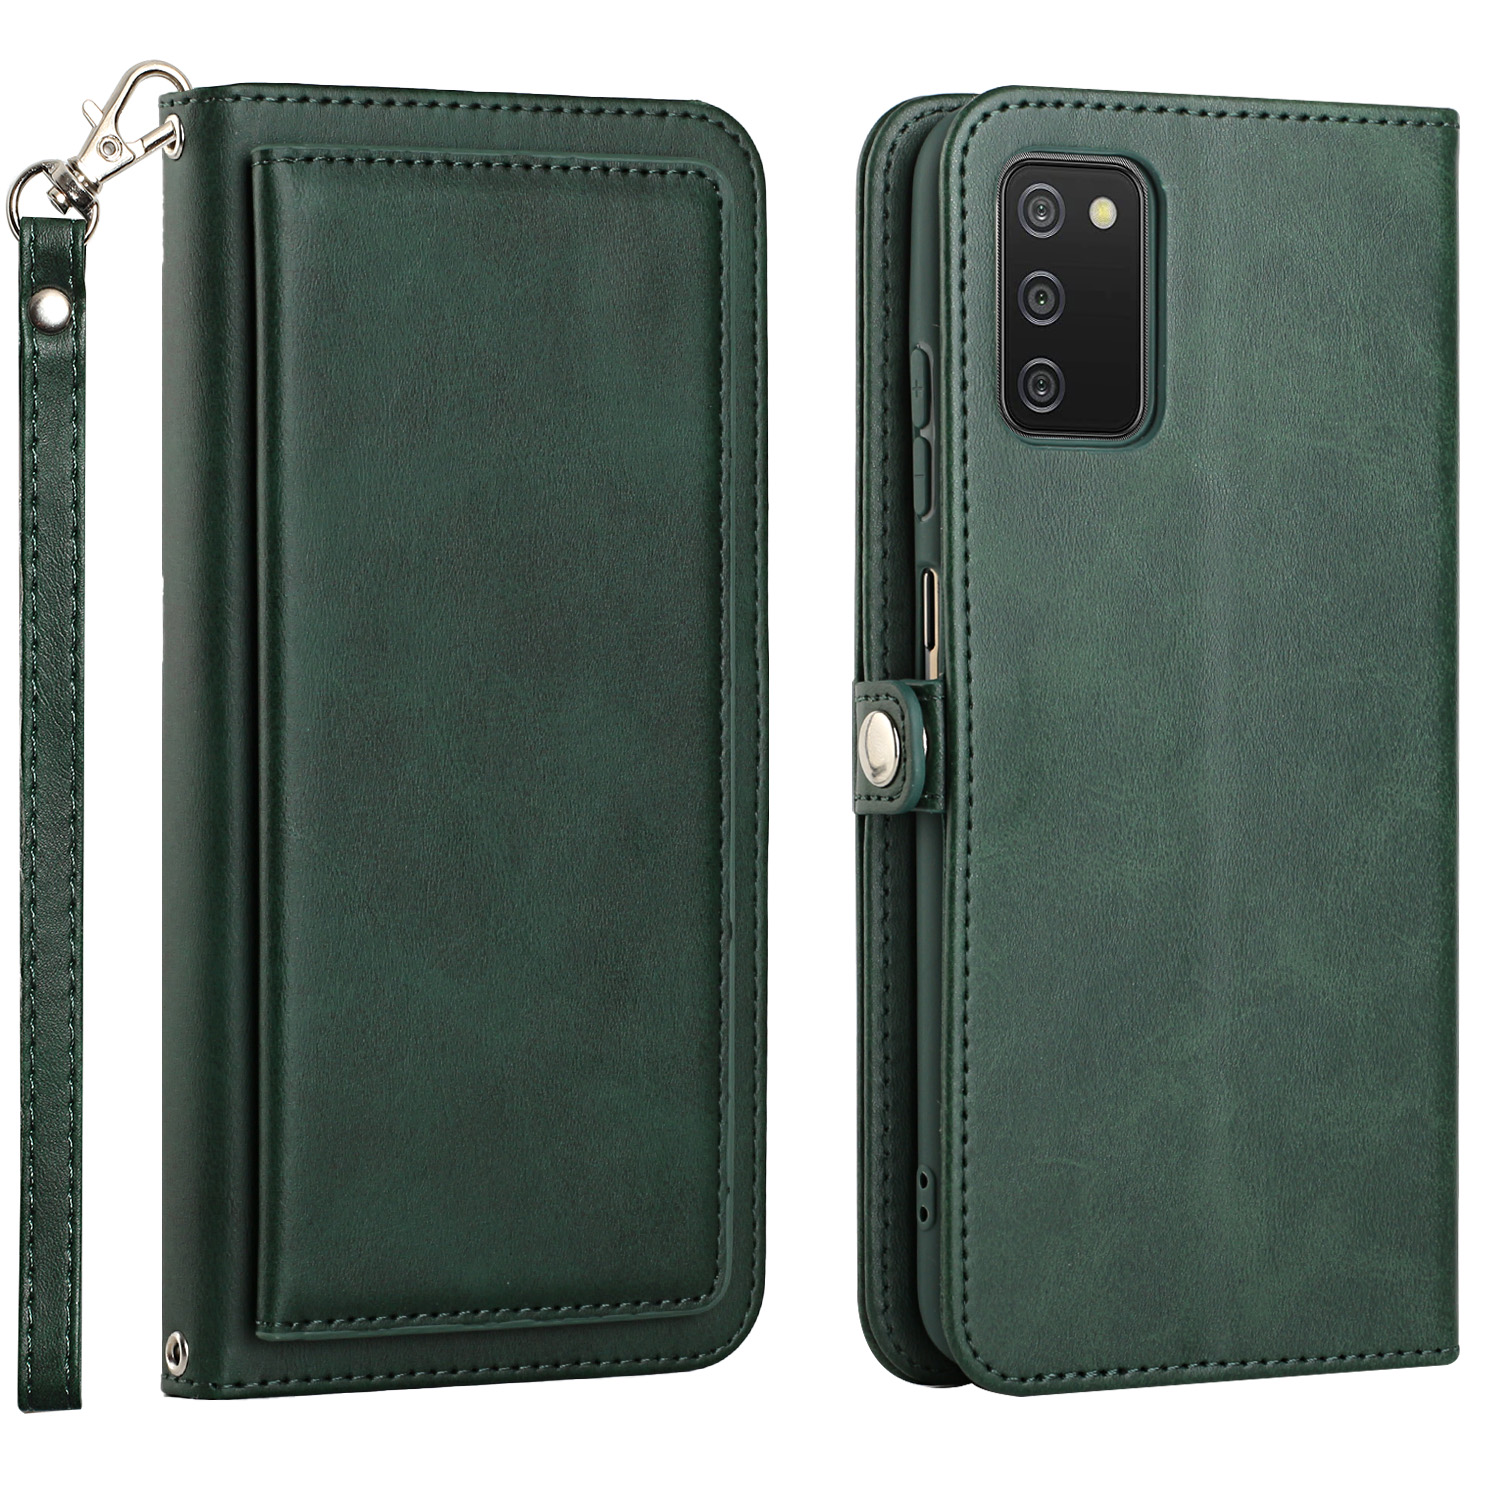 Premium PU Leather Folio WALLET Front Cover Case for Galaxy A02s (Green)